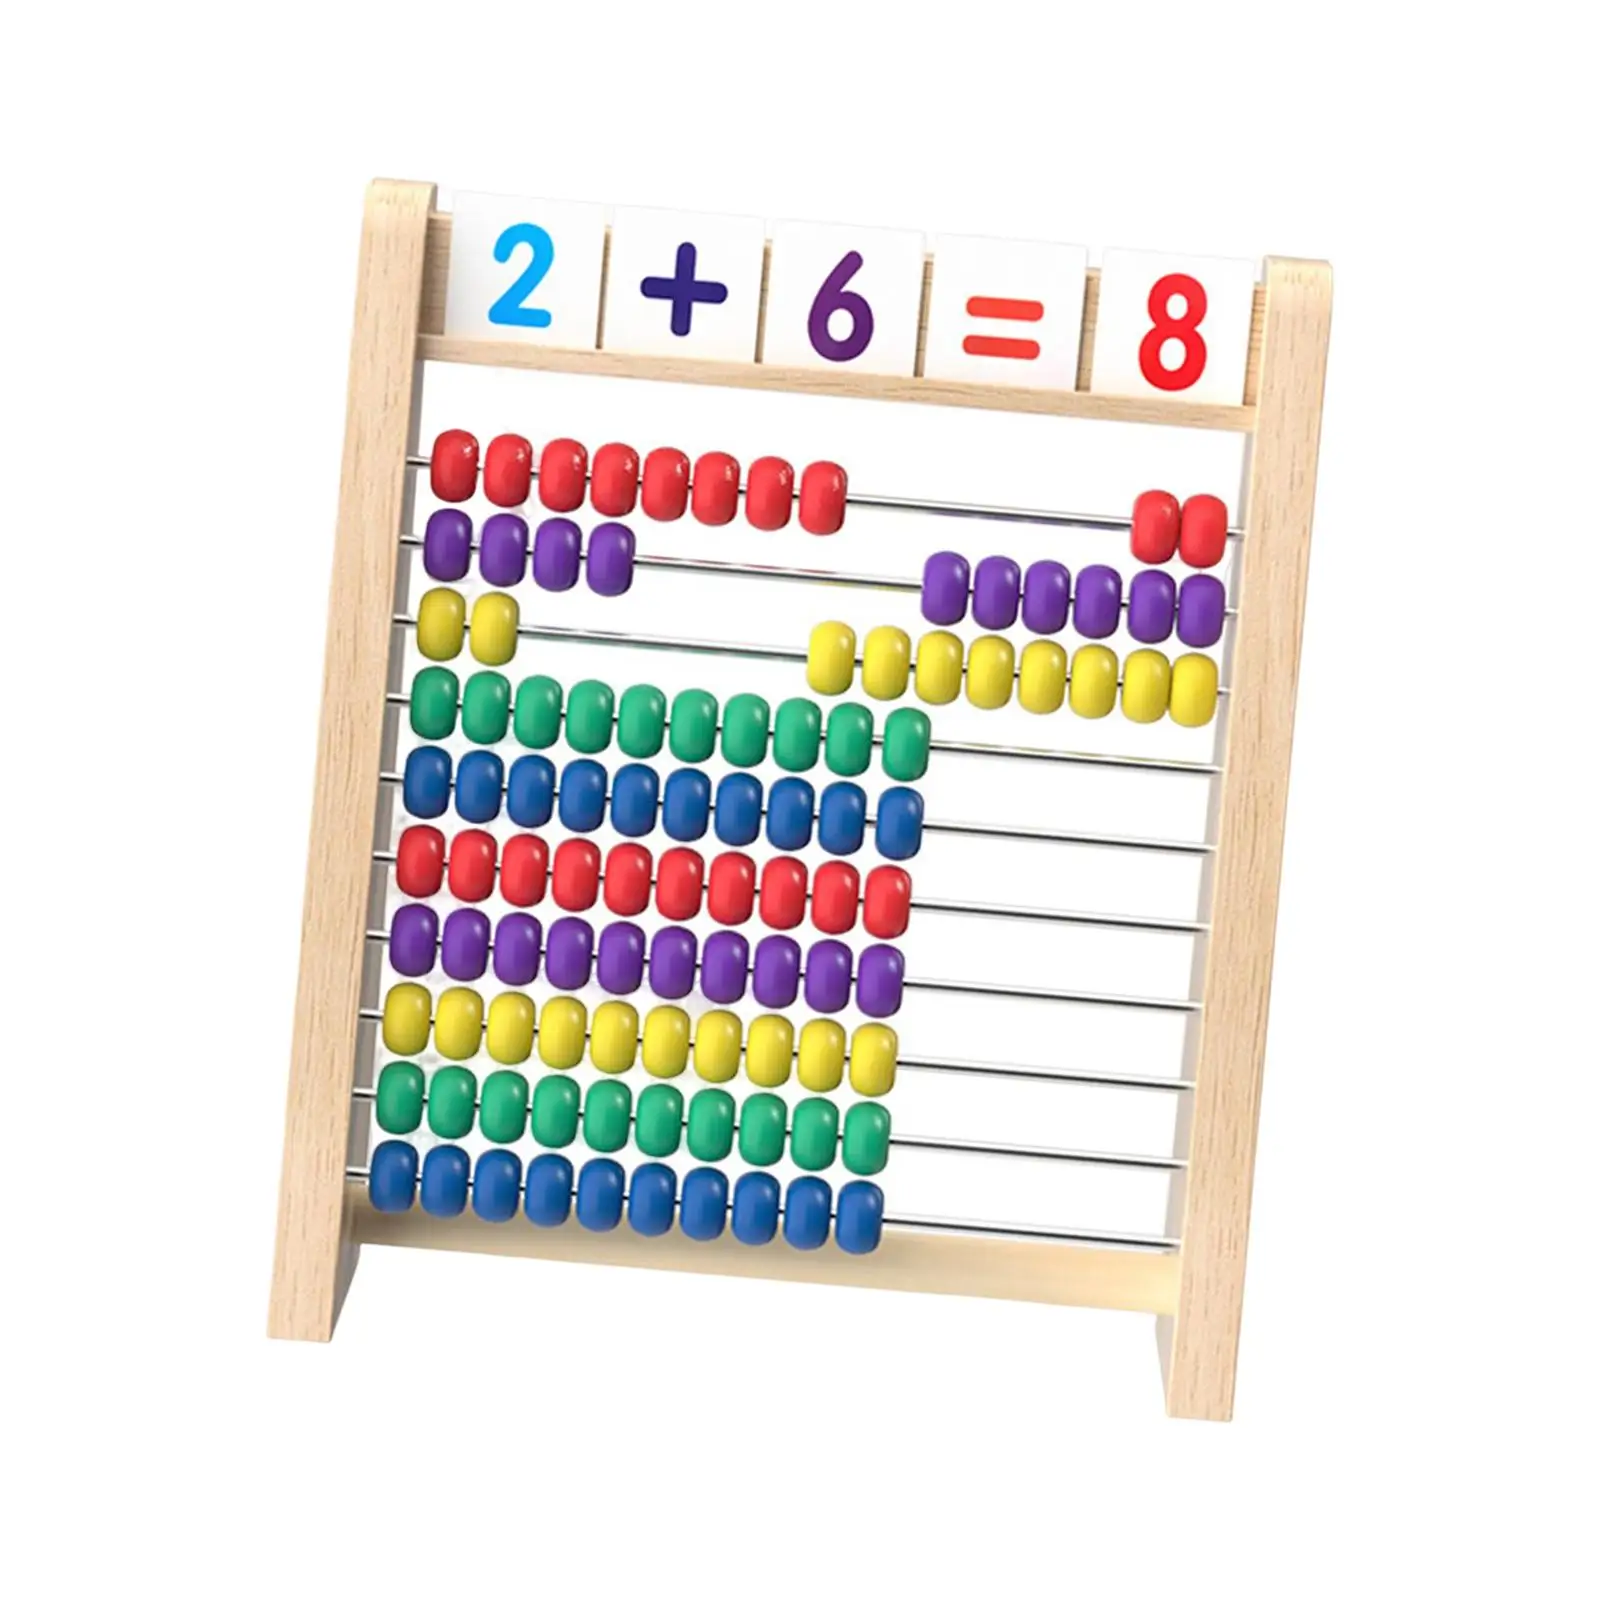 Preschool Learning Toy Counting Math Teaching Aids Math Learning Toys for Early Childhood Education Early Development Learning